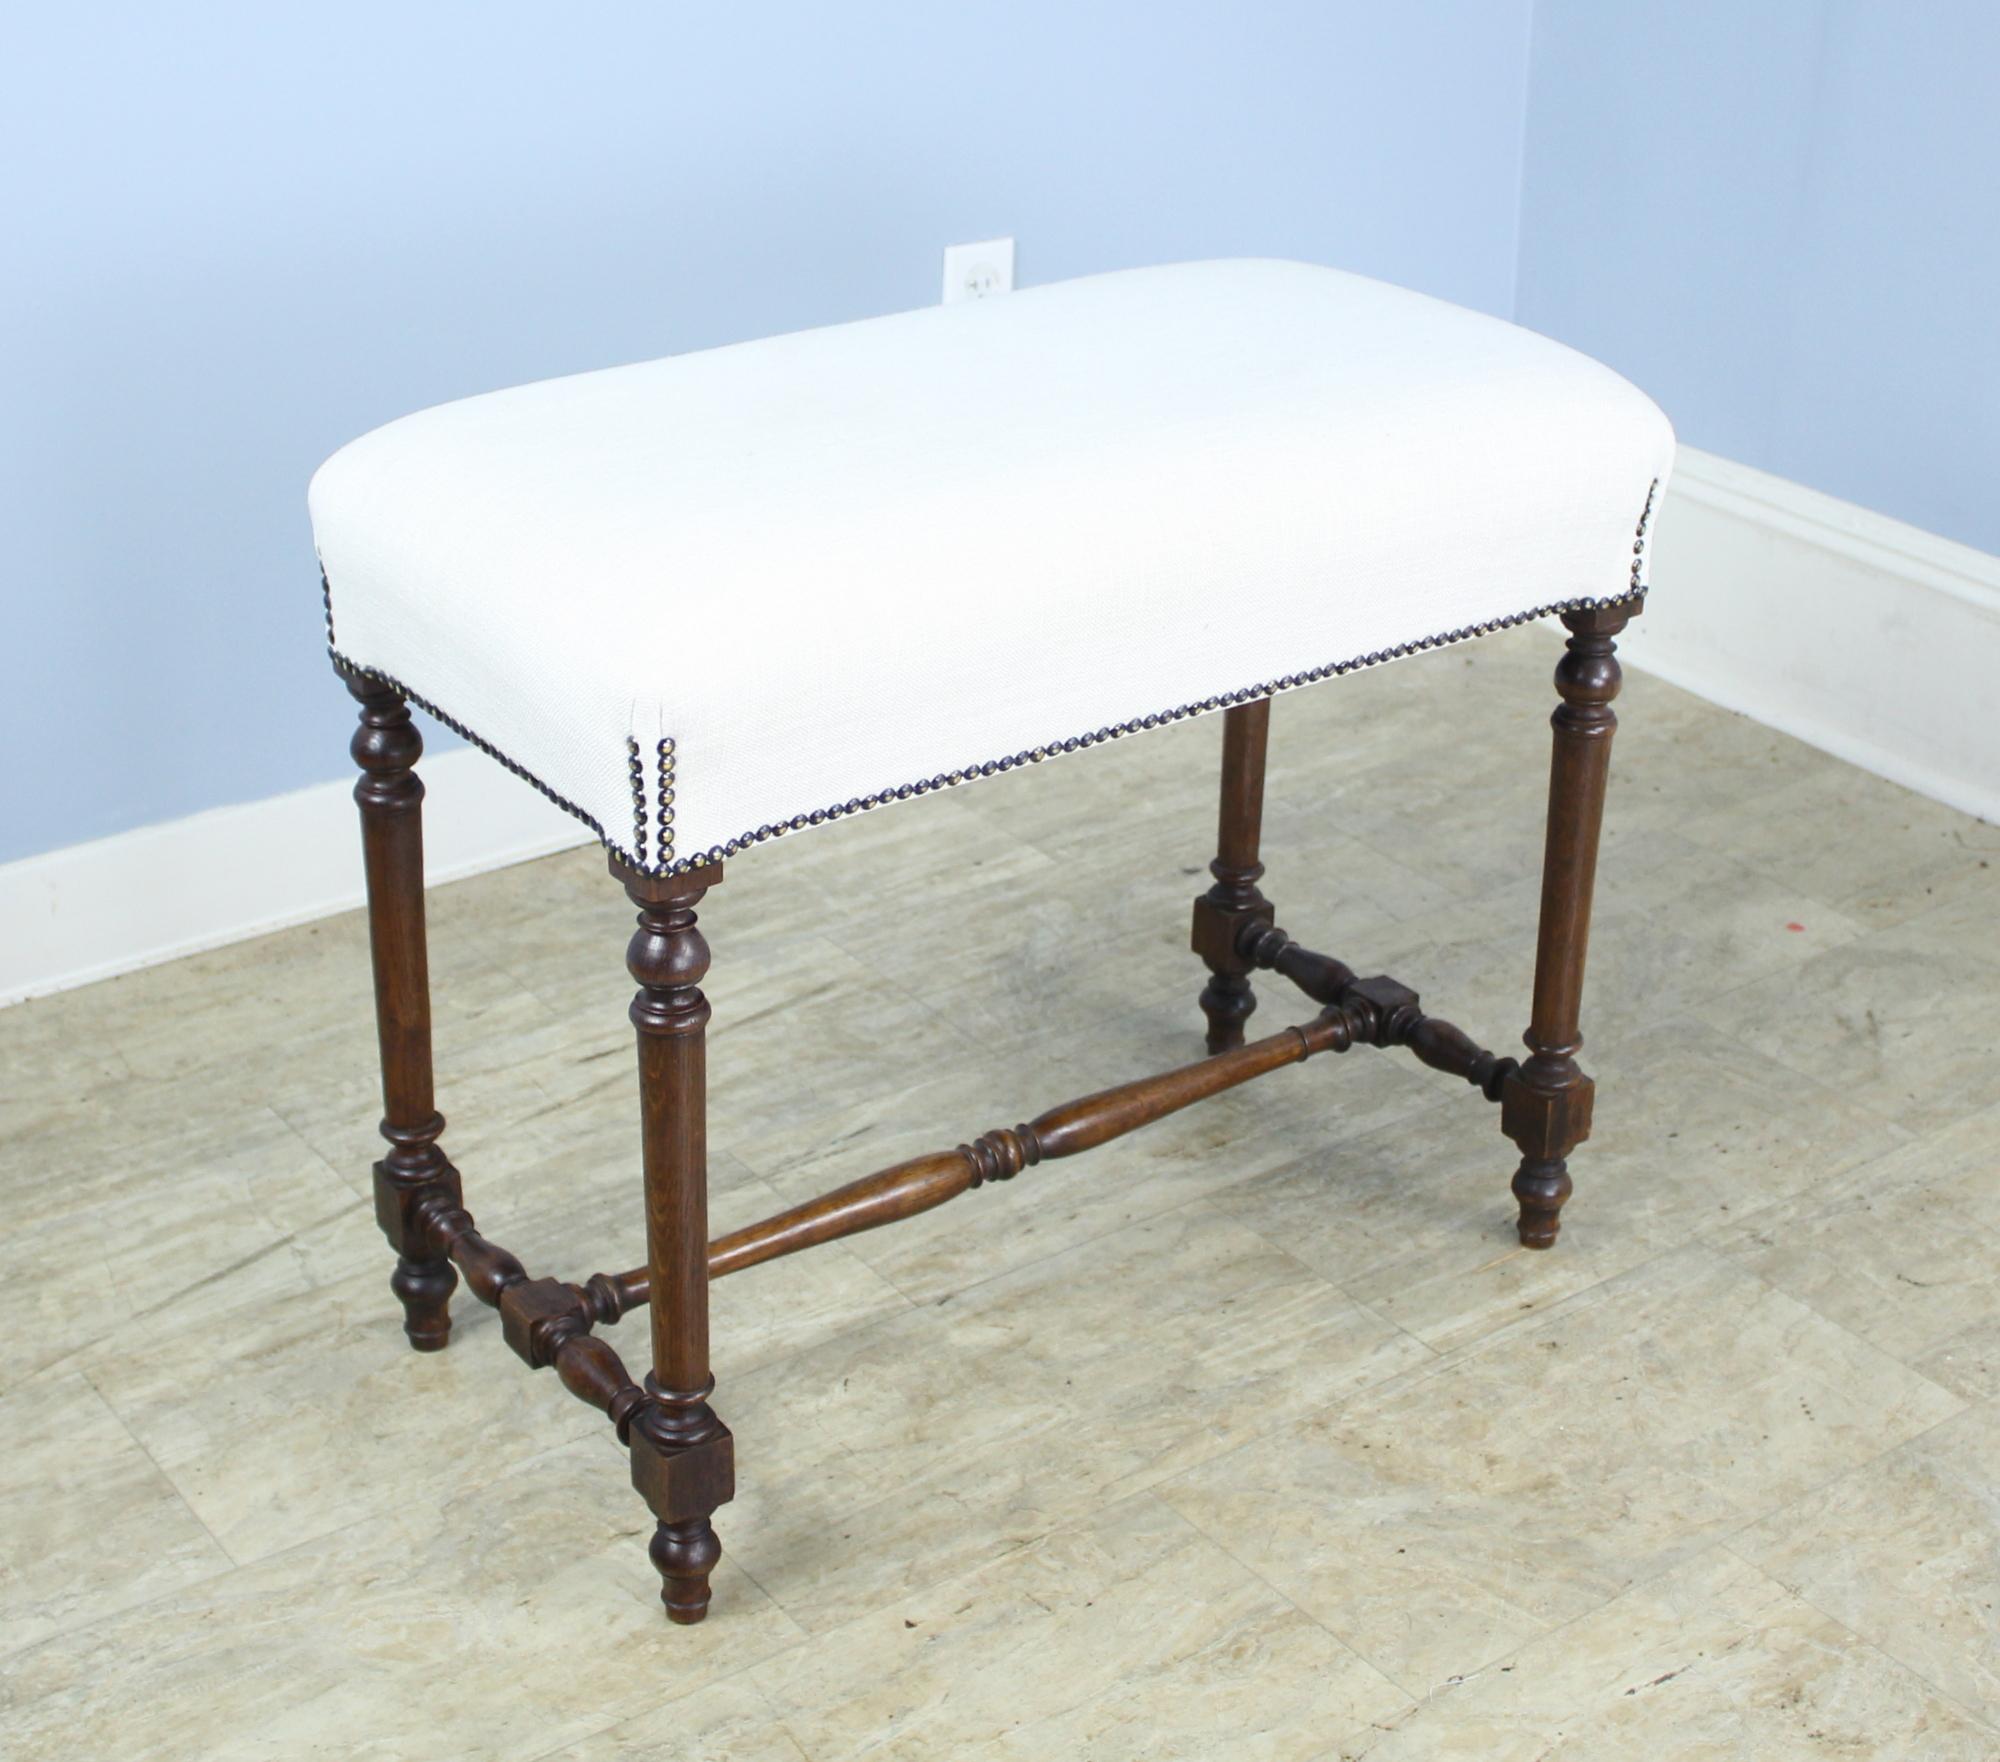 An elegant country stool with nice turned legs and a slightly higher than average loft. Nicely upholstered in cream linen and can be left as is or reupholstered. Nice nail head detail. Would work well at the end of the bed, as a hall perch, or under